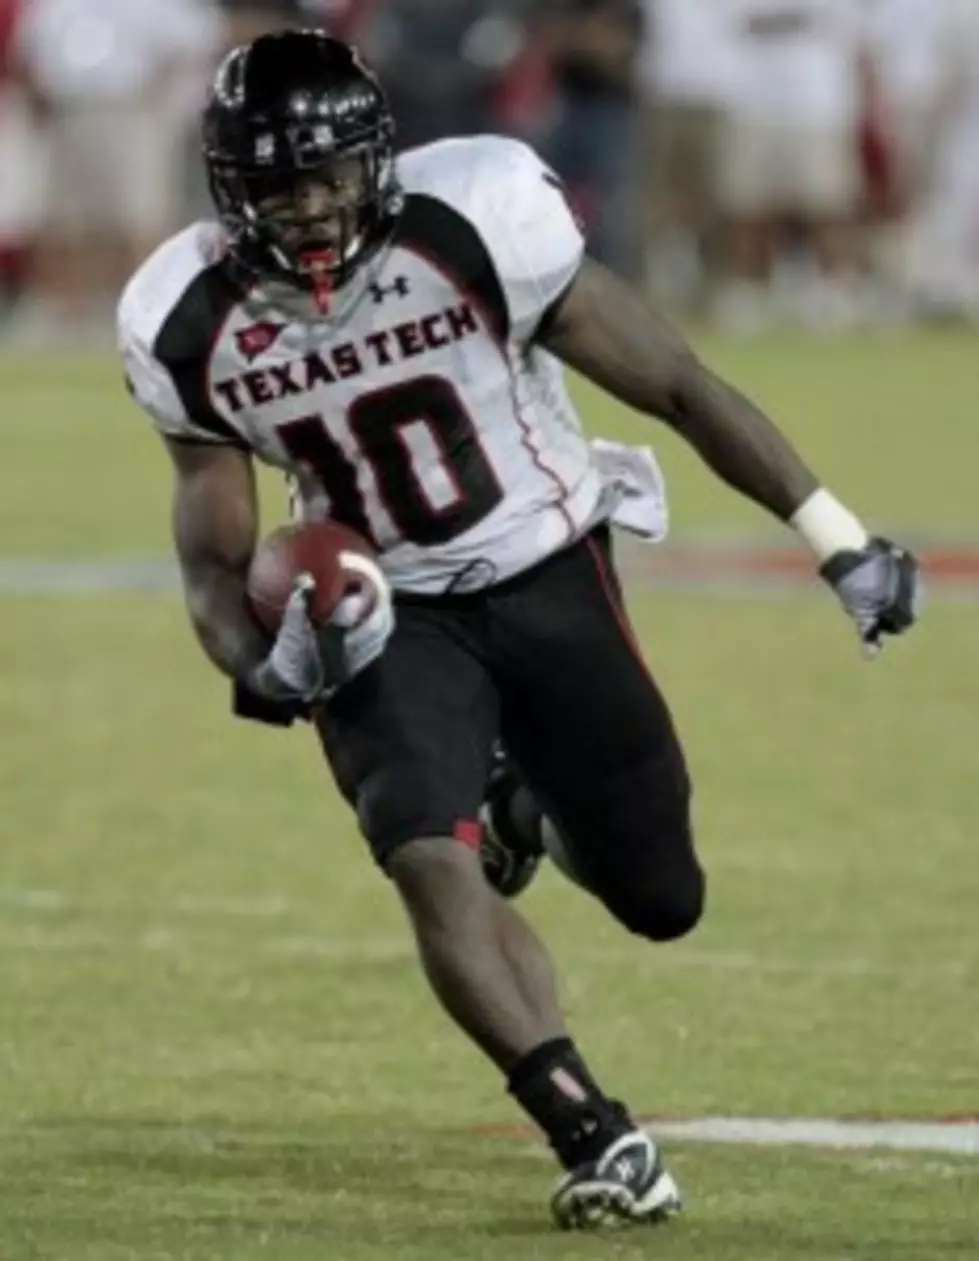 2011 Schedule for Texas Tech Football Released